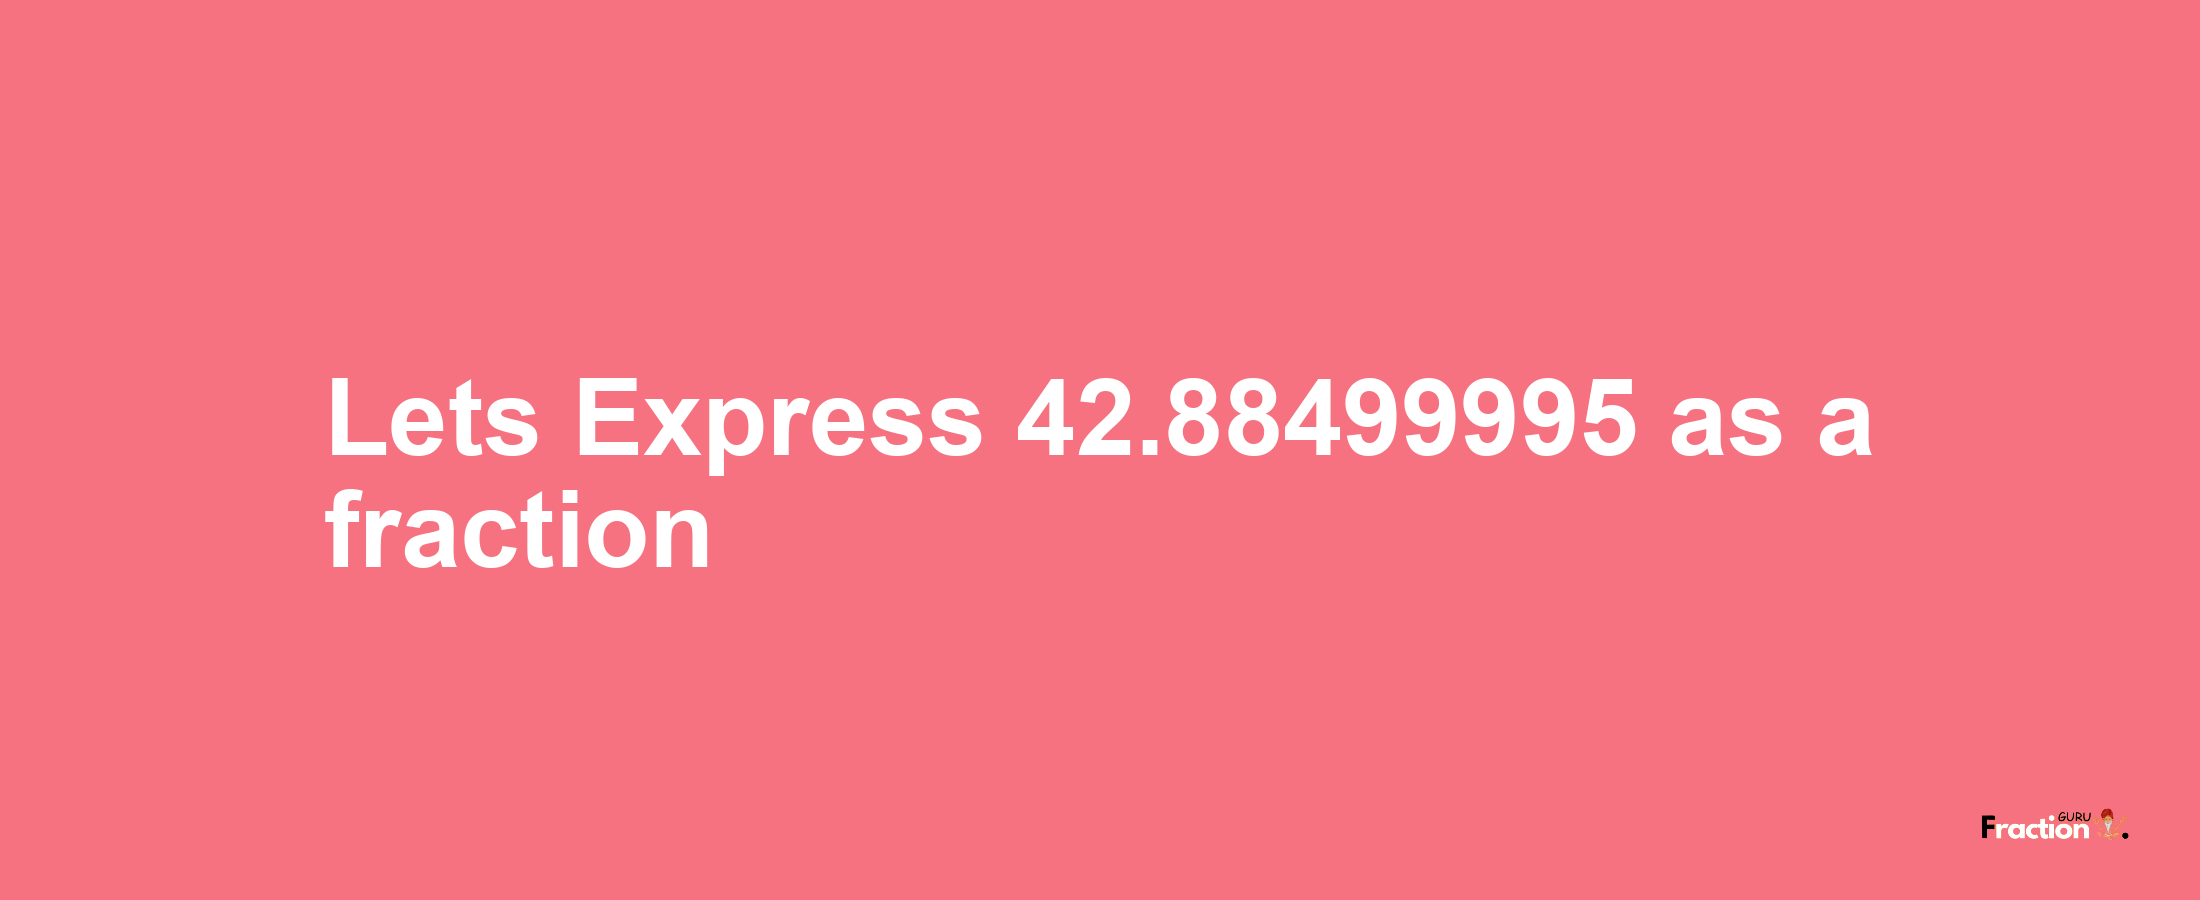 Lets Express 42.88499995 as afraction